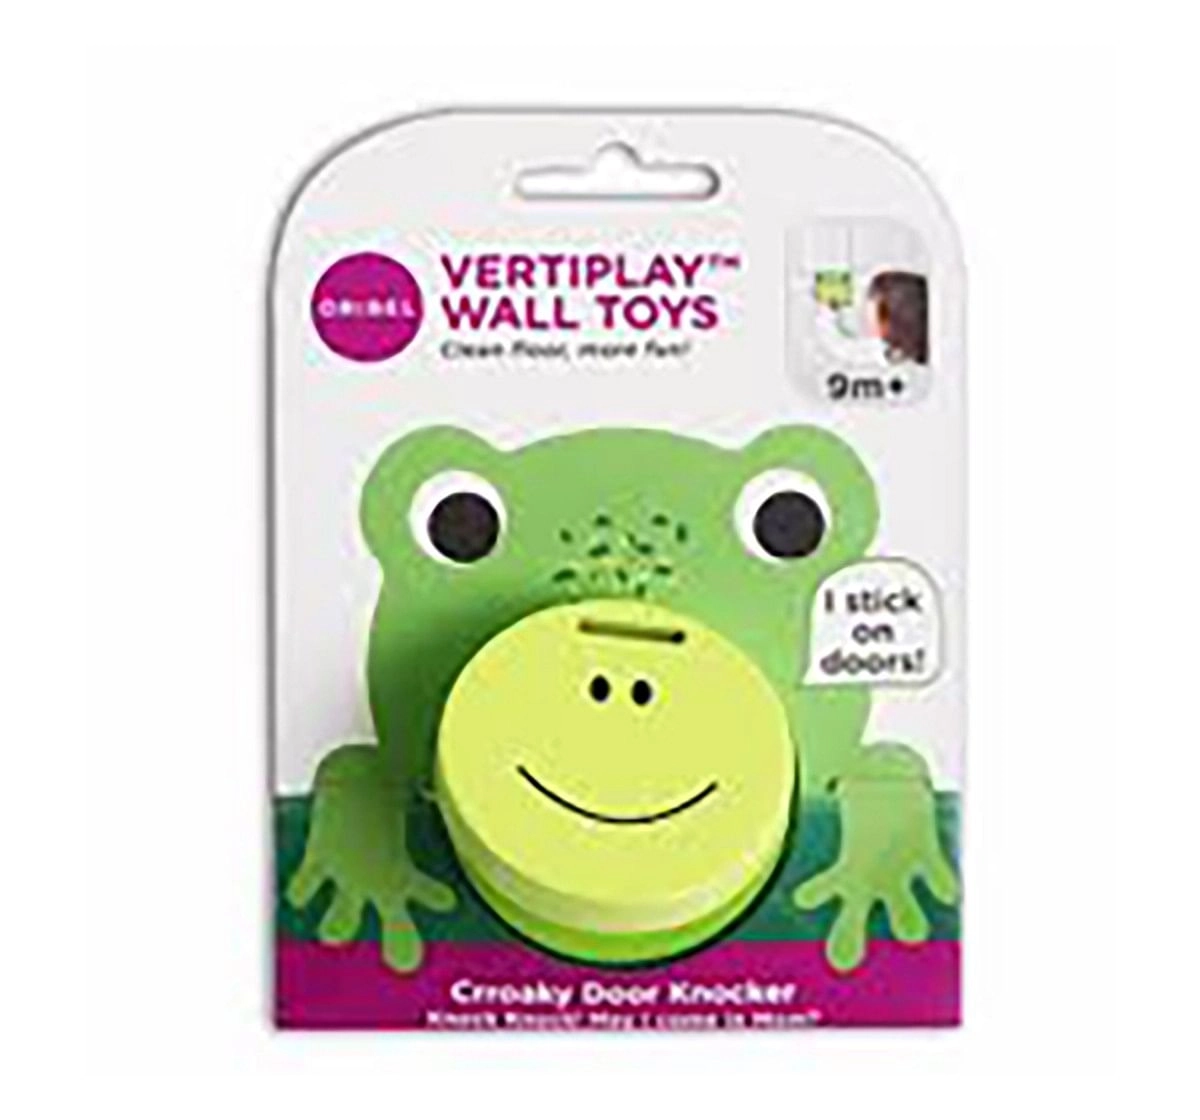 Vertiplay Wall Toy: Crroaky Door Knocker Activity Toys for Kids age 9M+ 